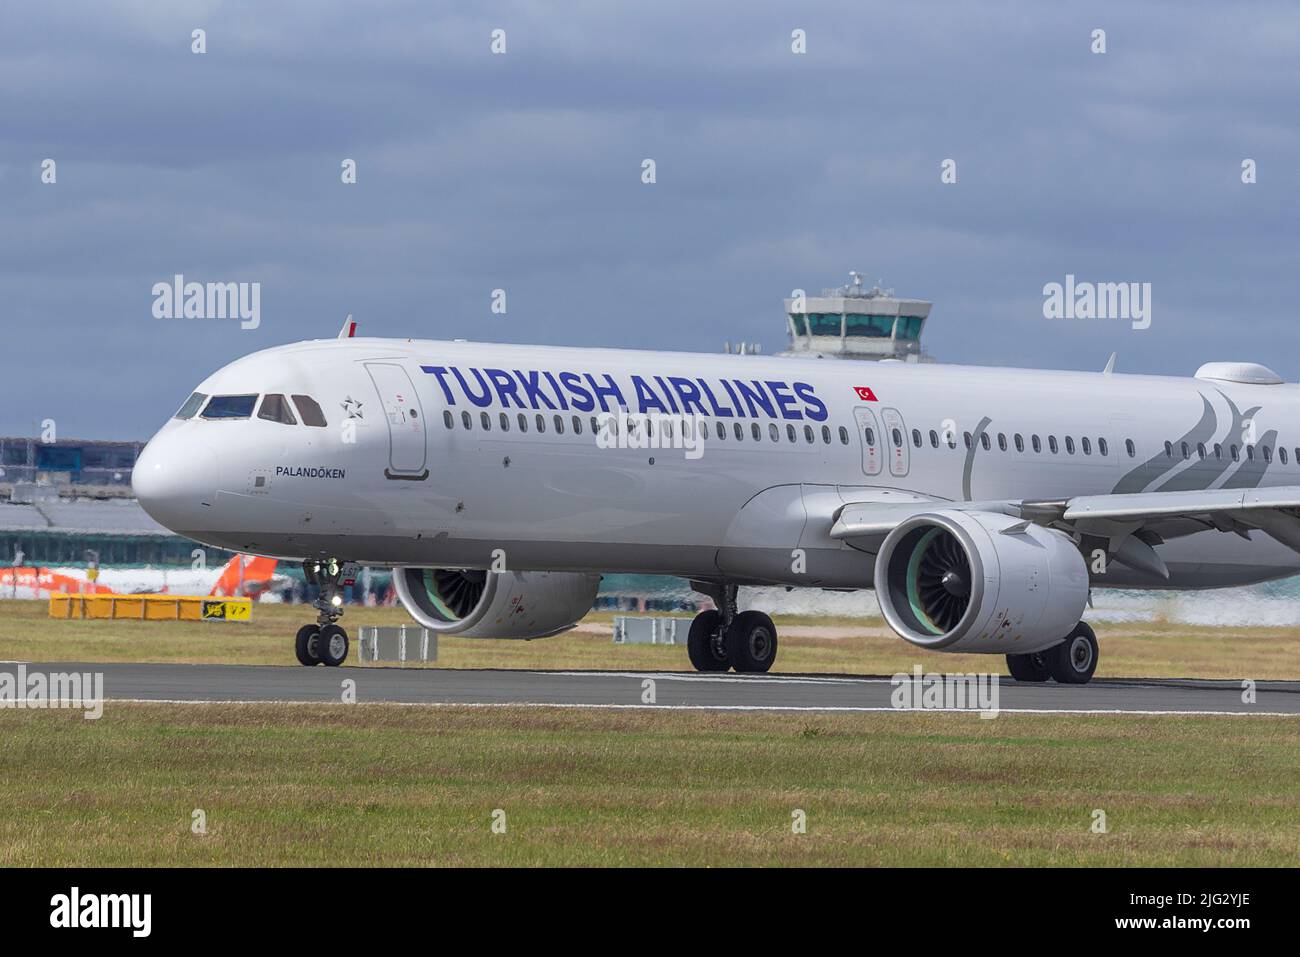 Turkish Airlines Airbus A321-271NX REG TC-LST at Manchester airport. Stock Photo